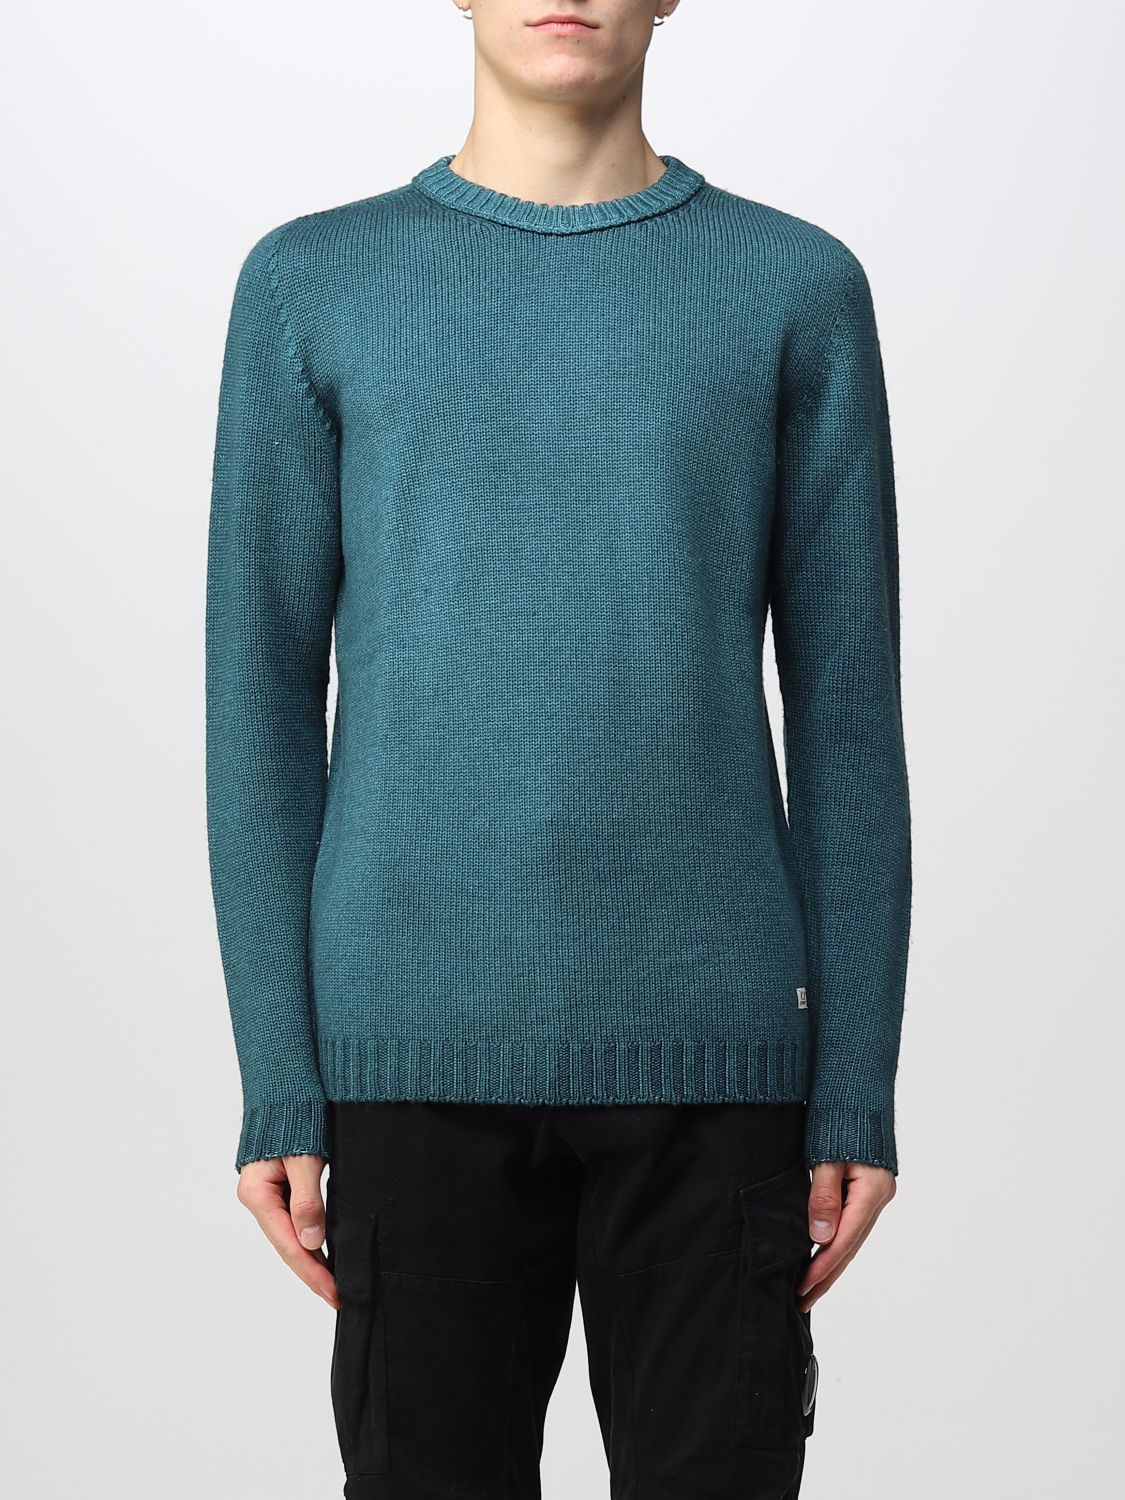 C.P. COMPANY: sweater for man - Teal | C.p. Company sweater ...